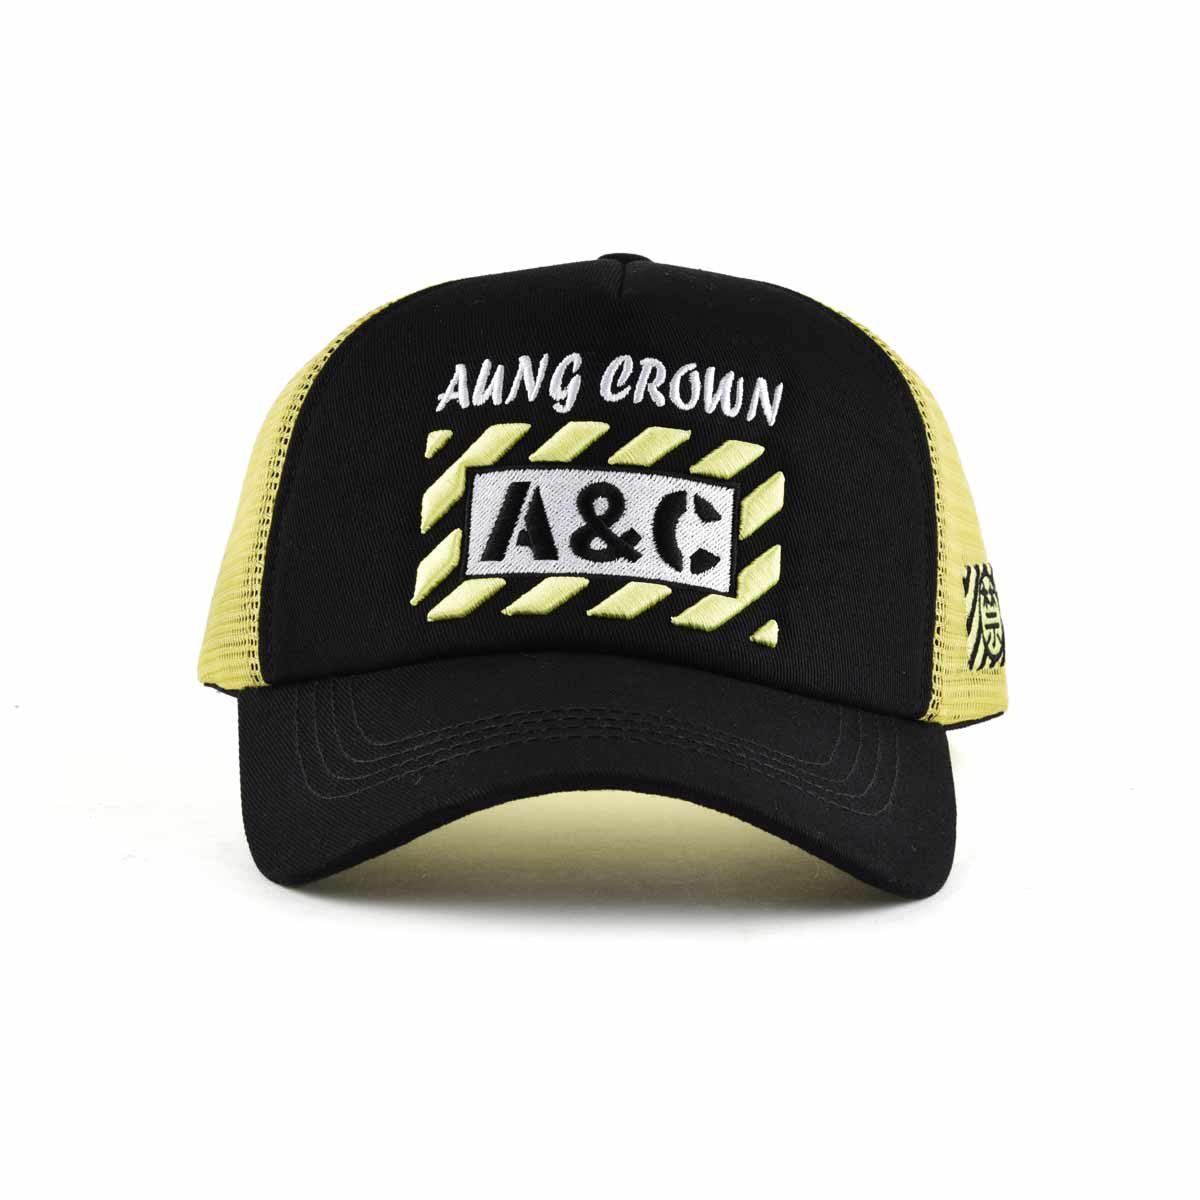 Aung-Crown-casual-black-and-yellow-trucker-hat-for-women-and-men-KN2012091